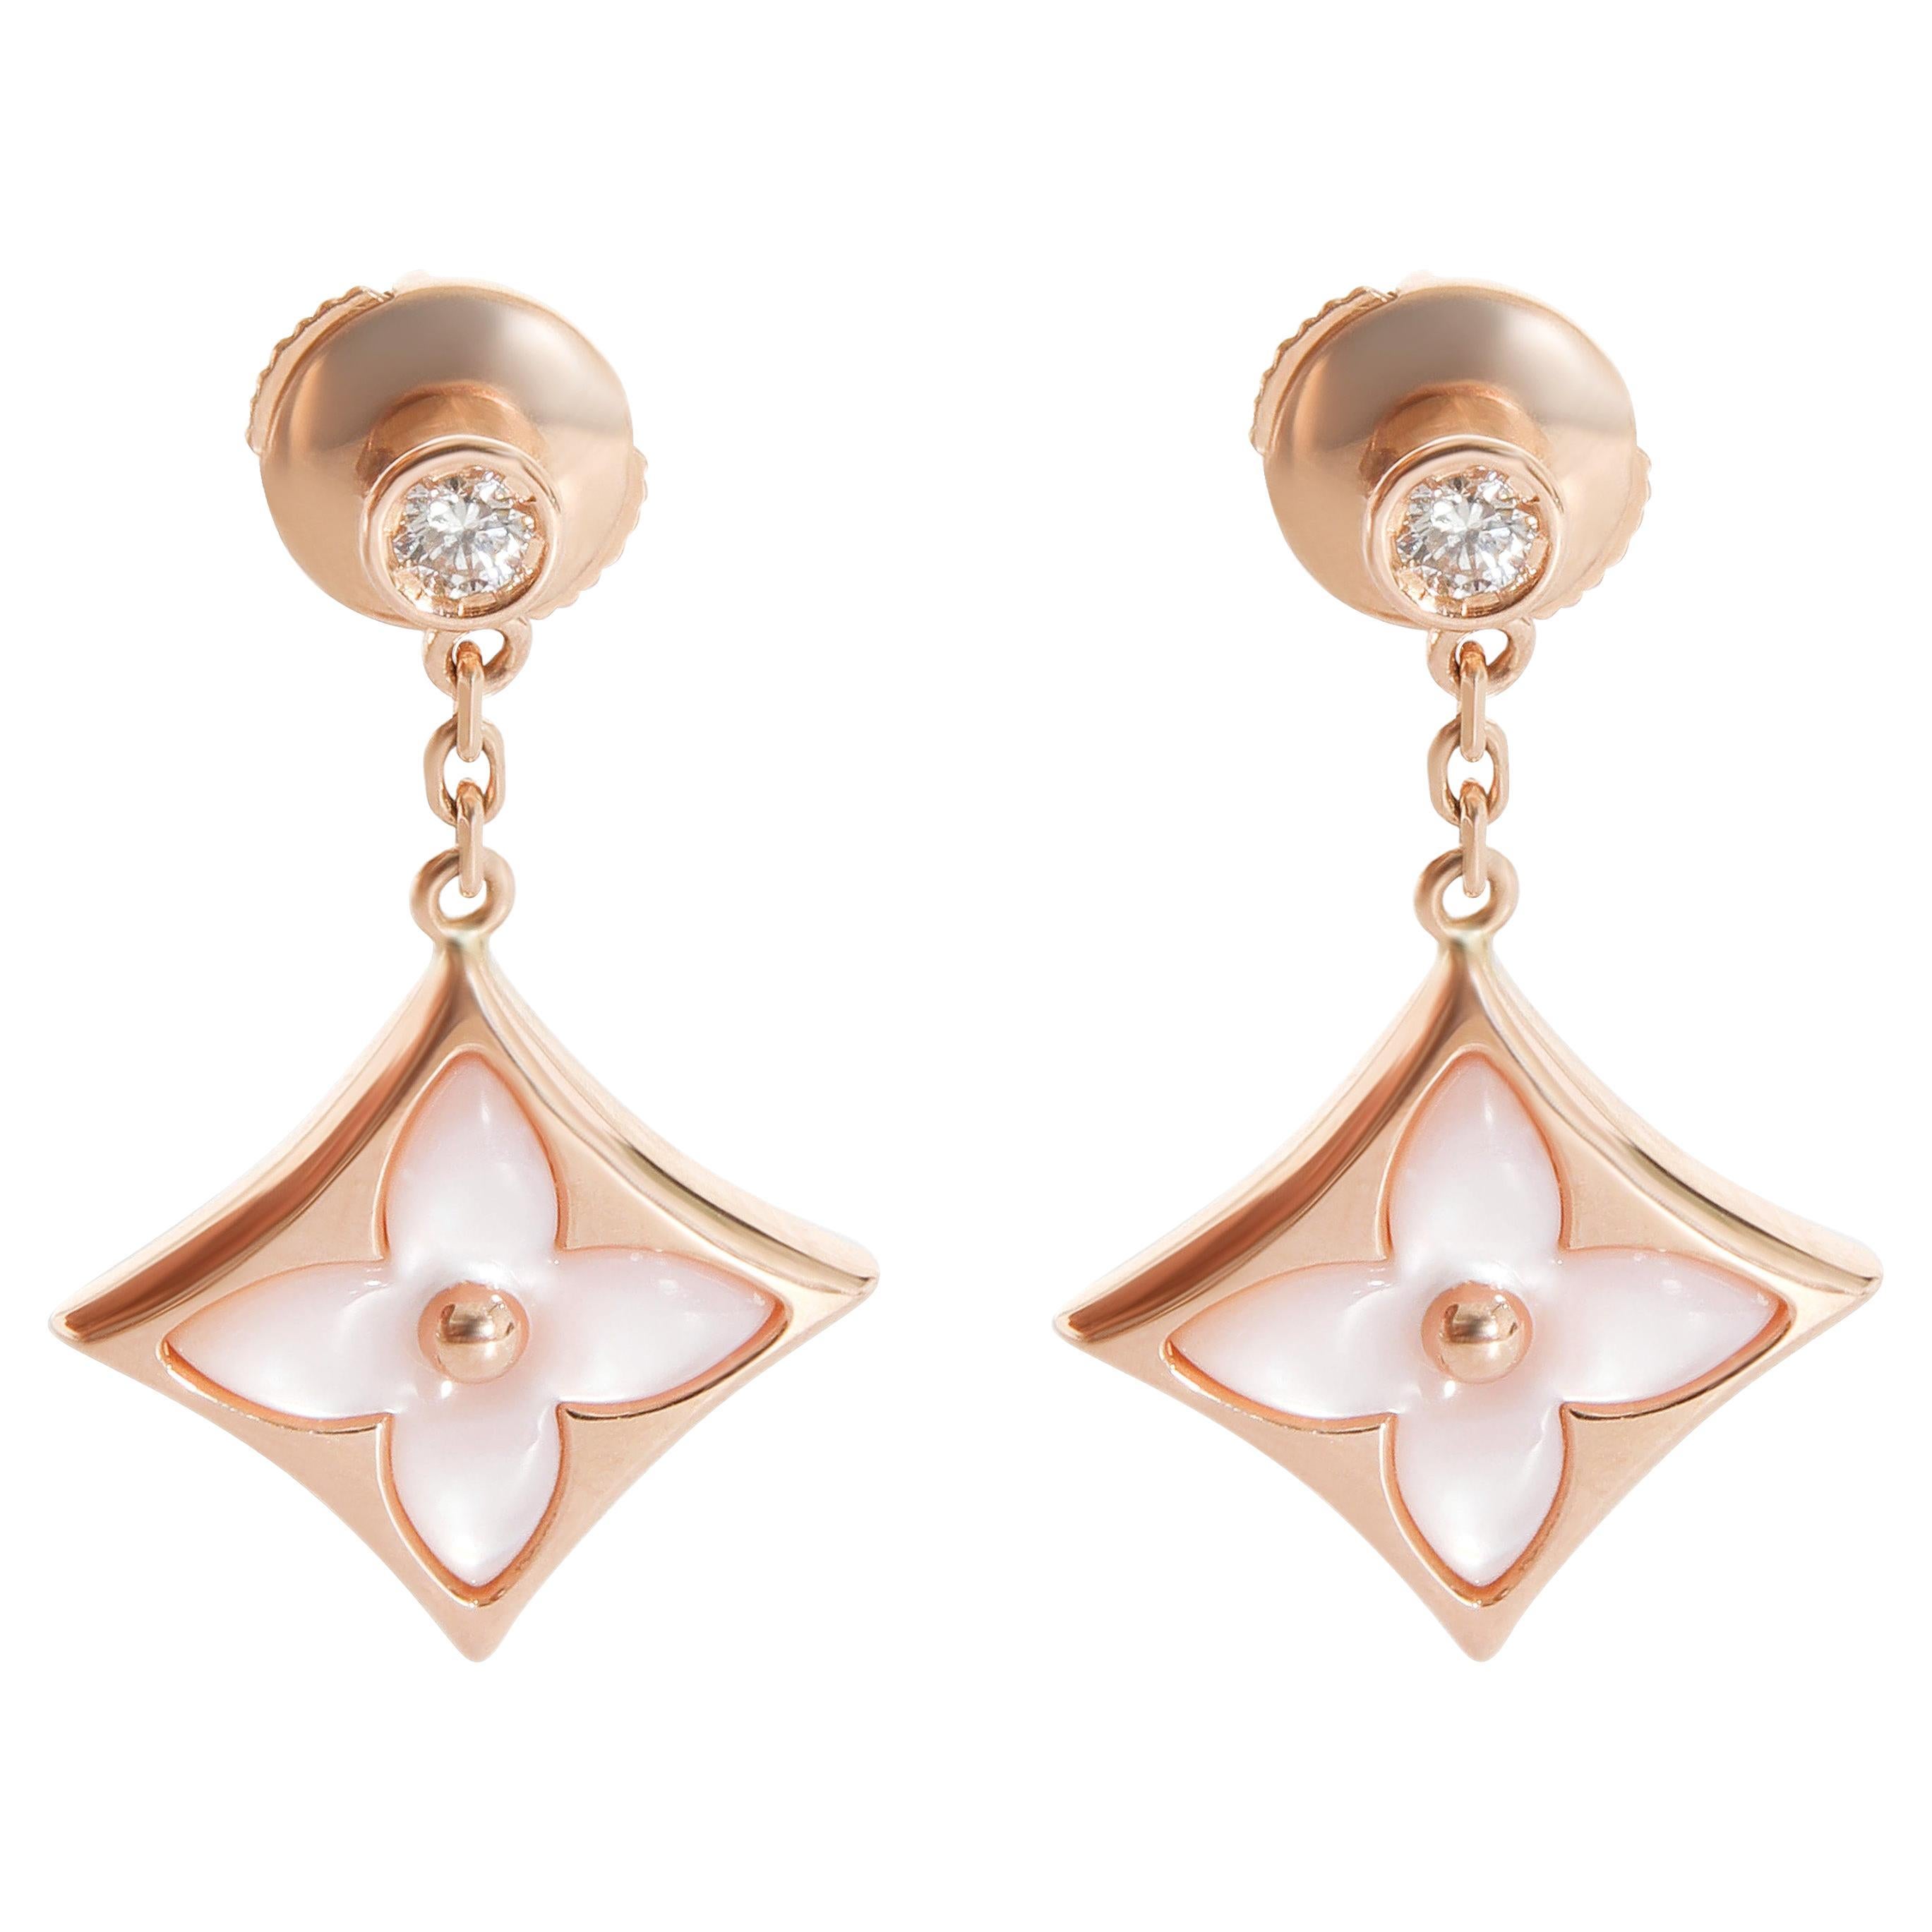 Louis Vuitton Idylle Blossom LV Ear Studs, Yellow Gold And Diamond – Now  You Glow